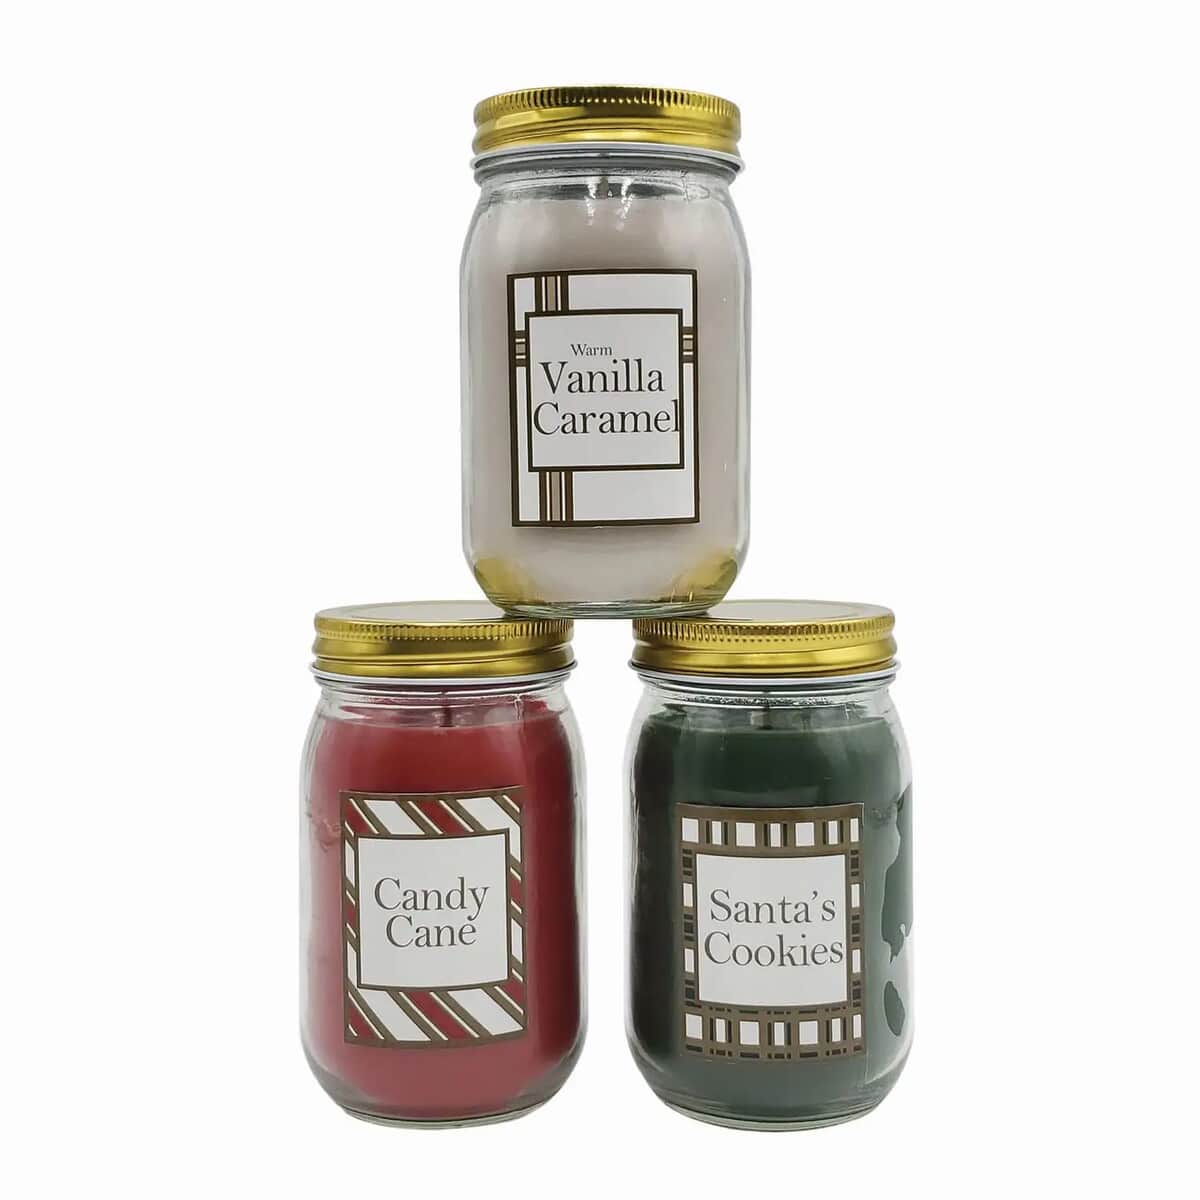 Lumabase Holiday Sweets Scented Candle Collection Set of 3 Candles -Santa's Cookies, Warm Vanilla Caramel, and Candy Cane image number 6